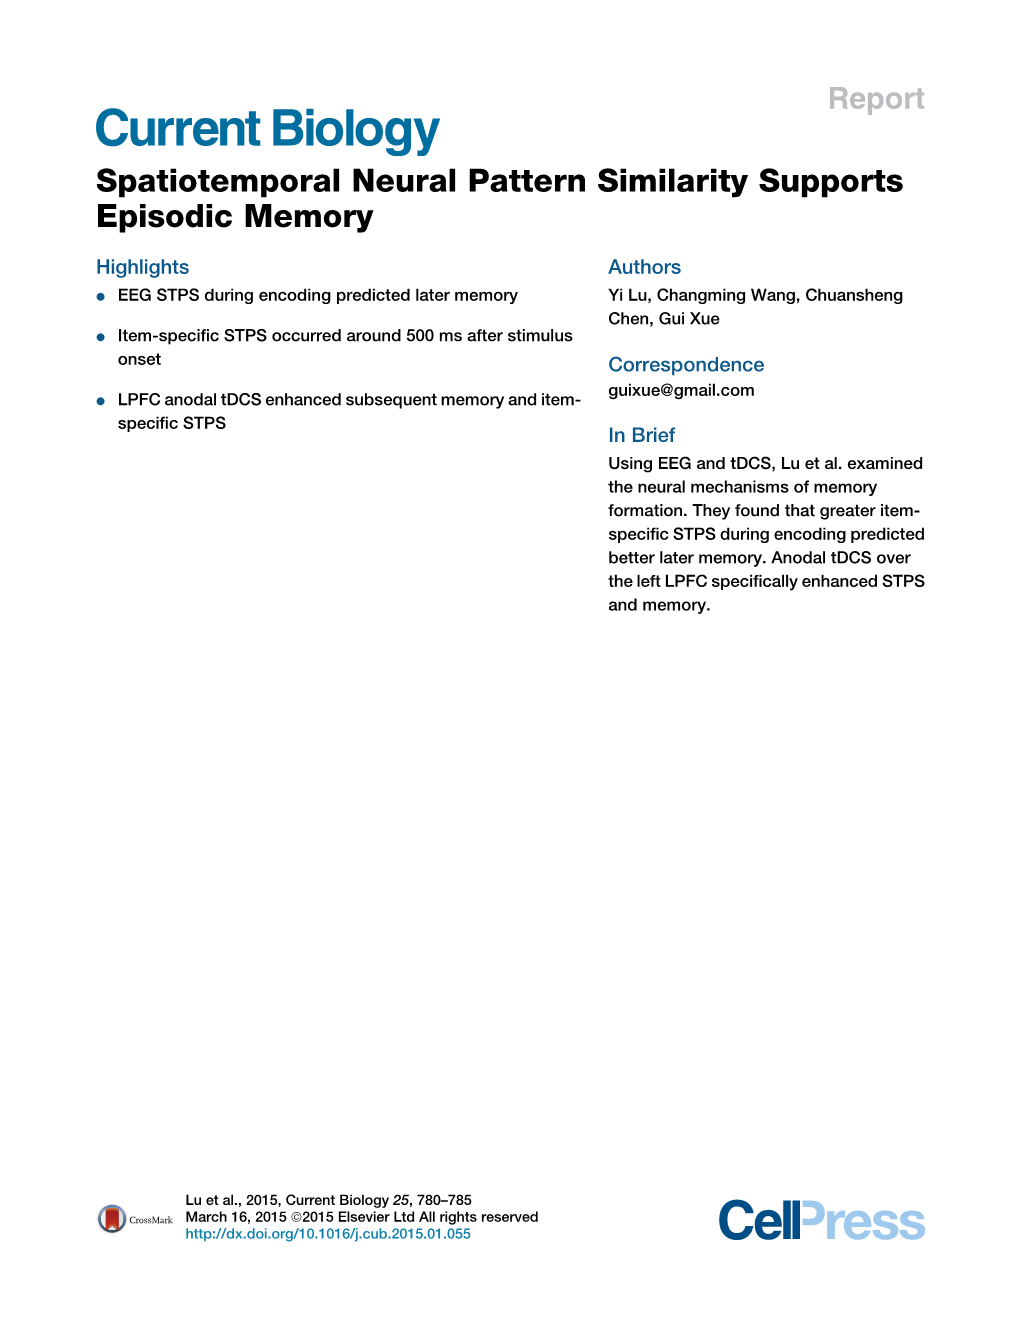 Spatiotemporal Neural Pattern Similarity Supports Episodic Memory